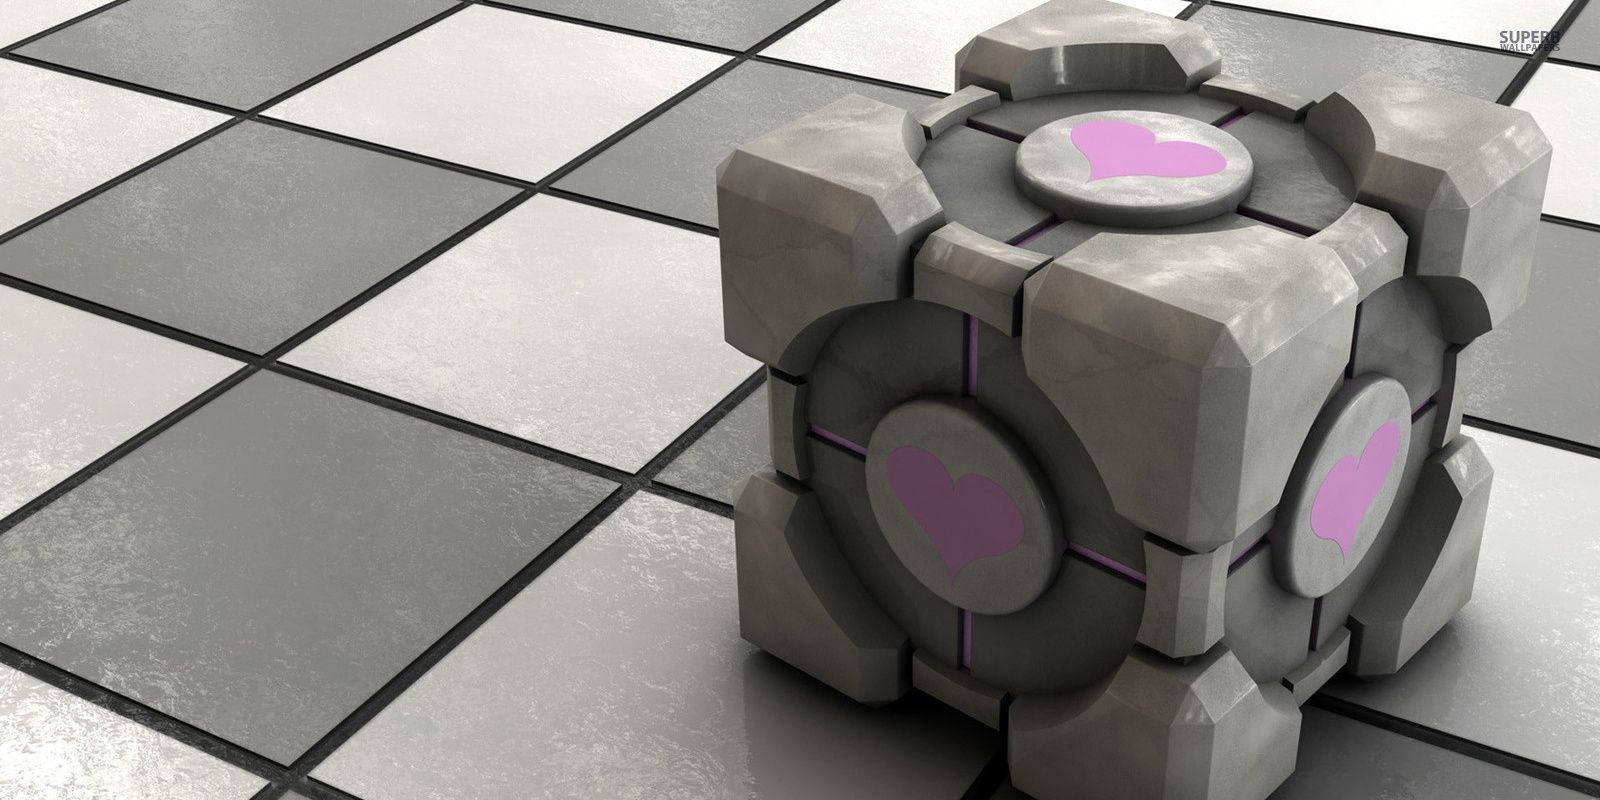 The Companion Cube from Portal